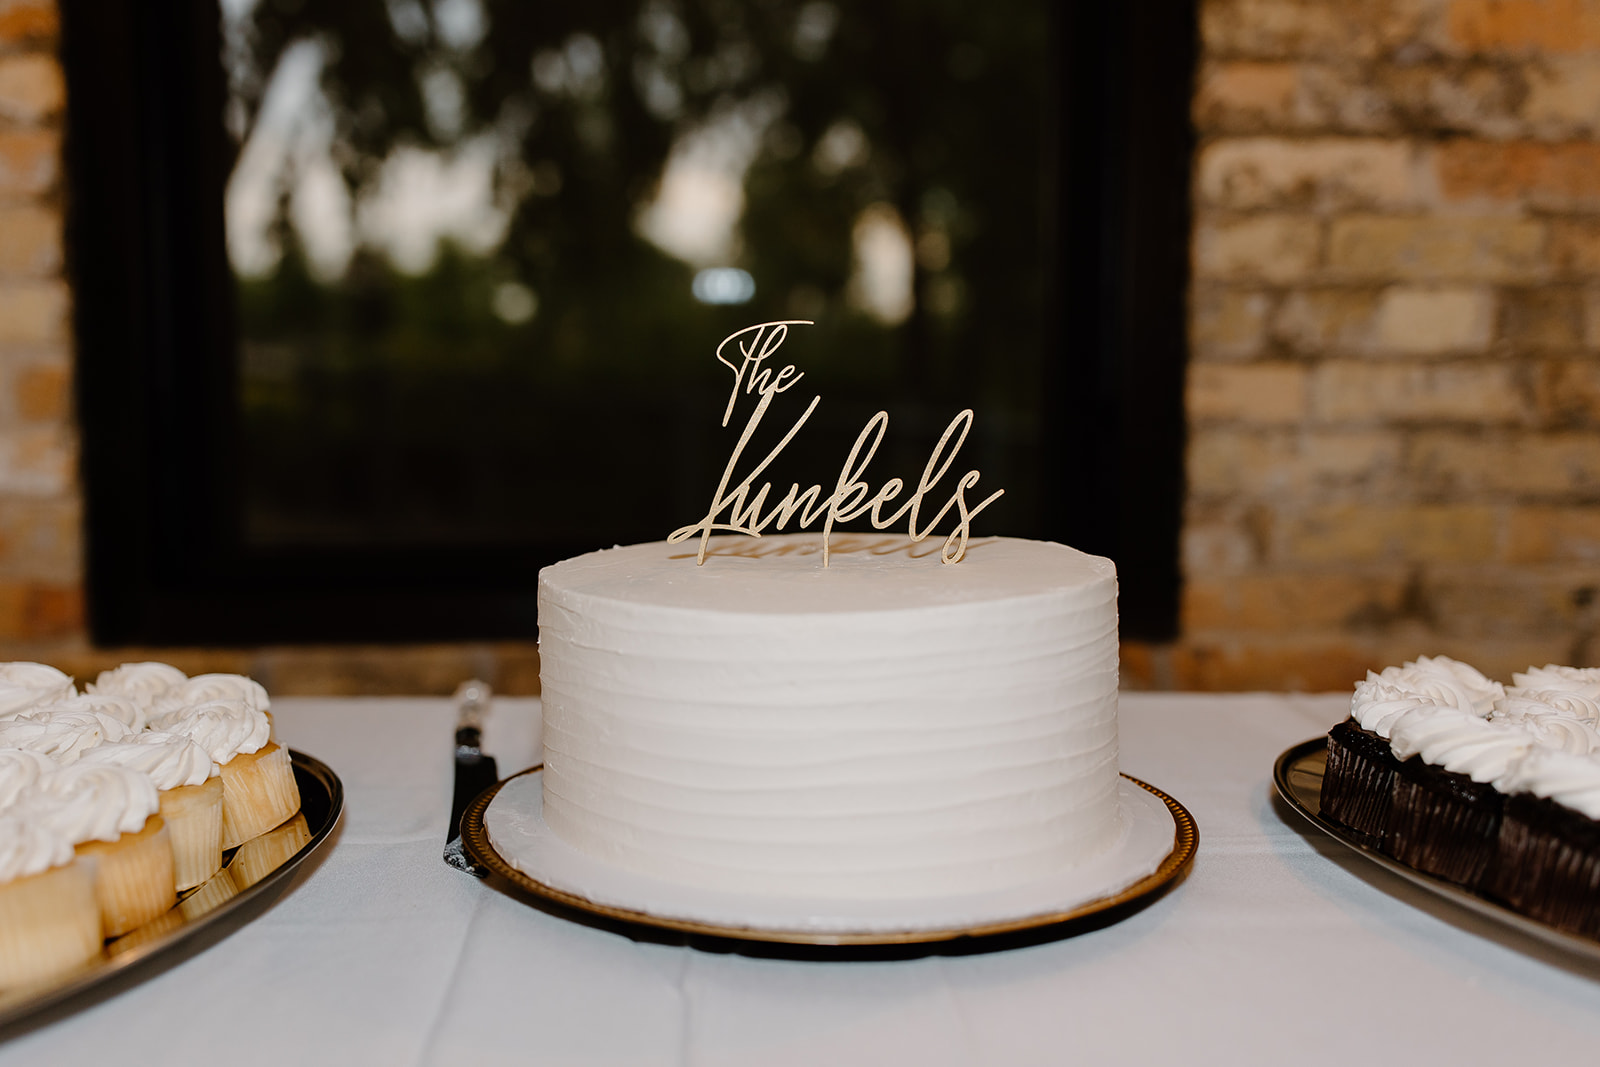 One tier wedding cake with a cake topper of a couple's last name